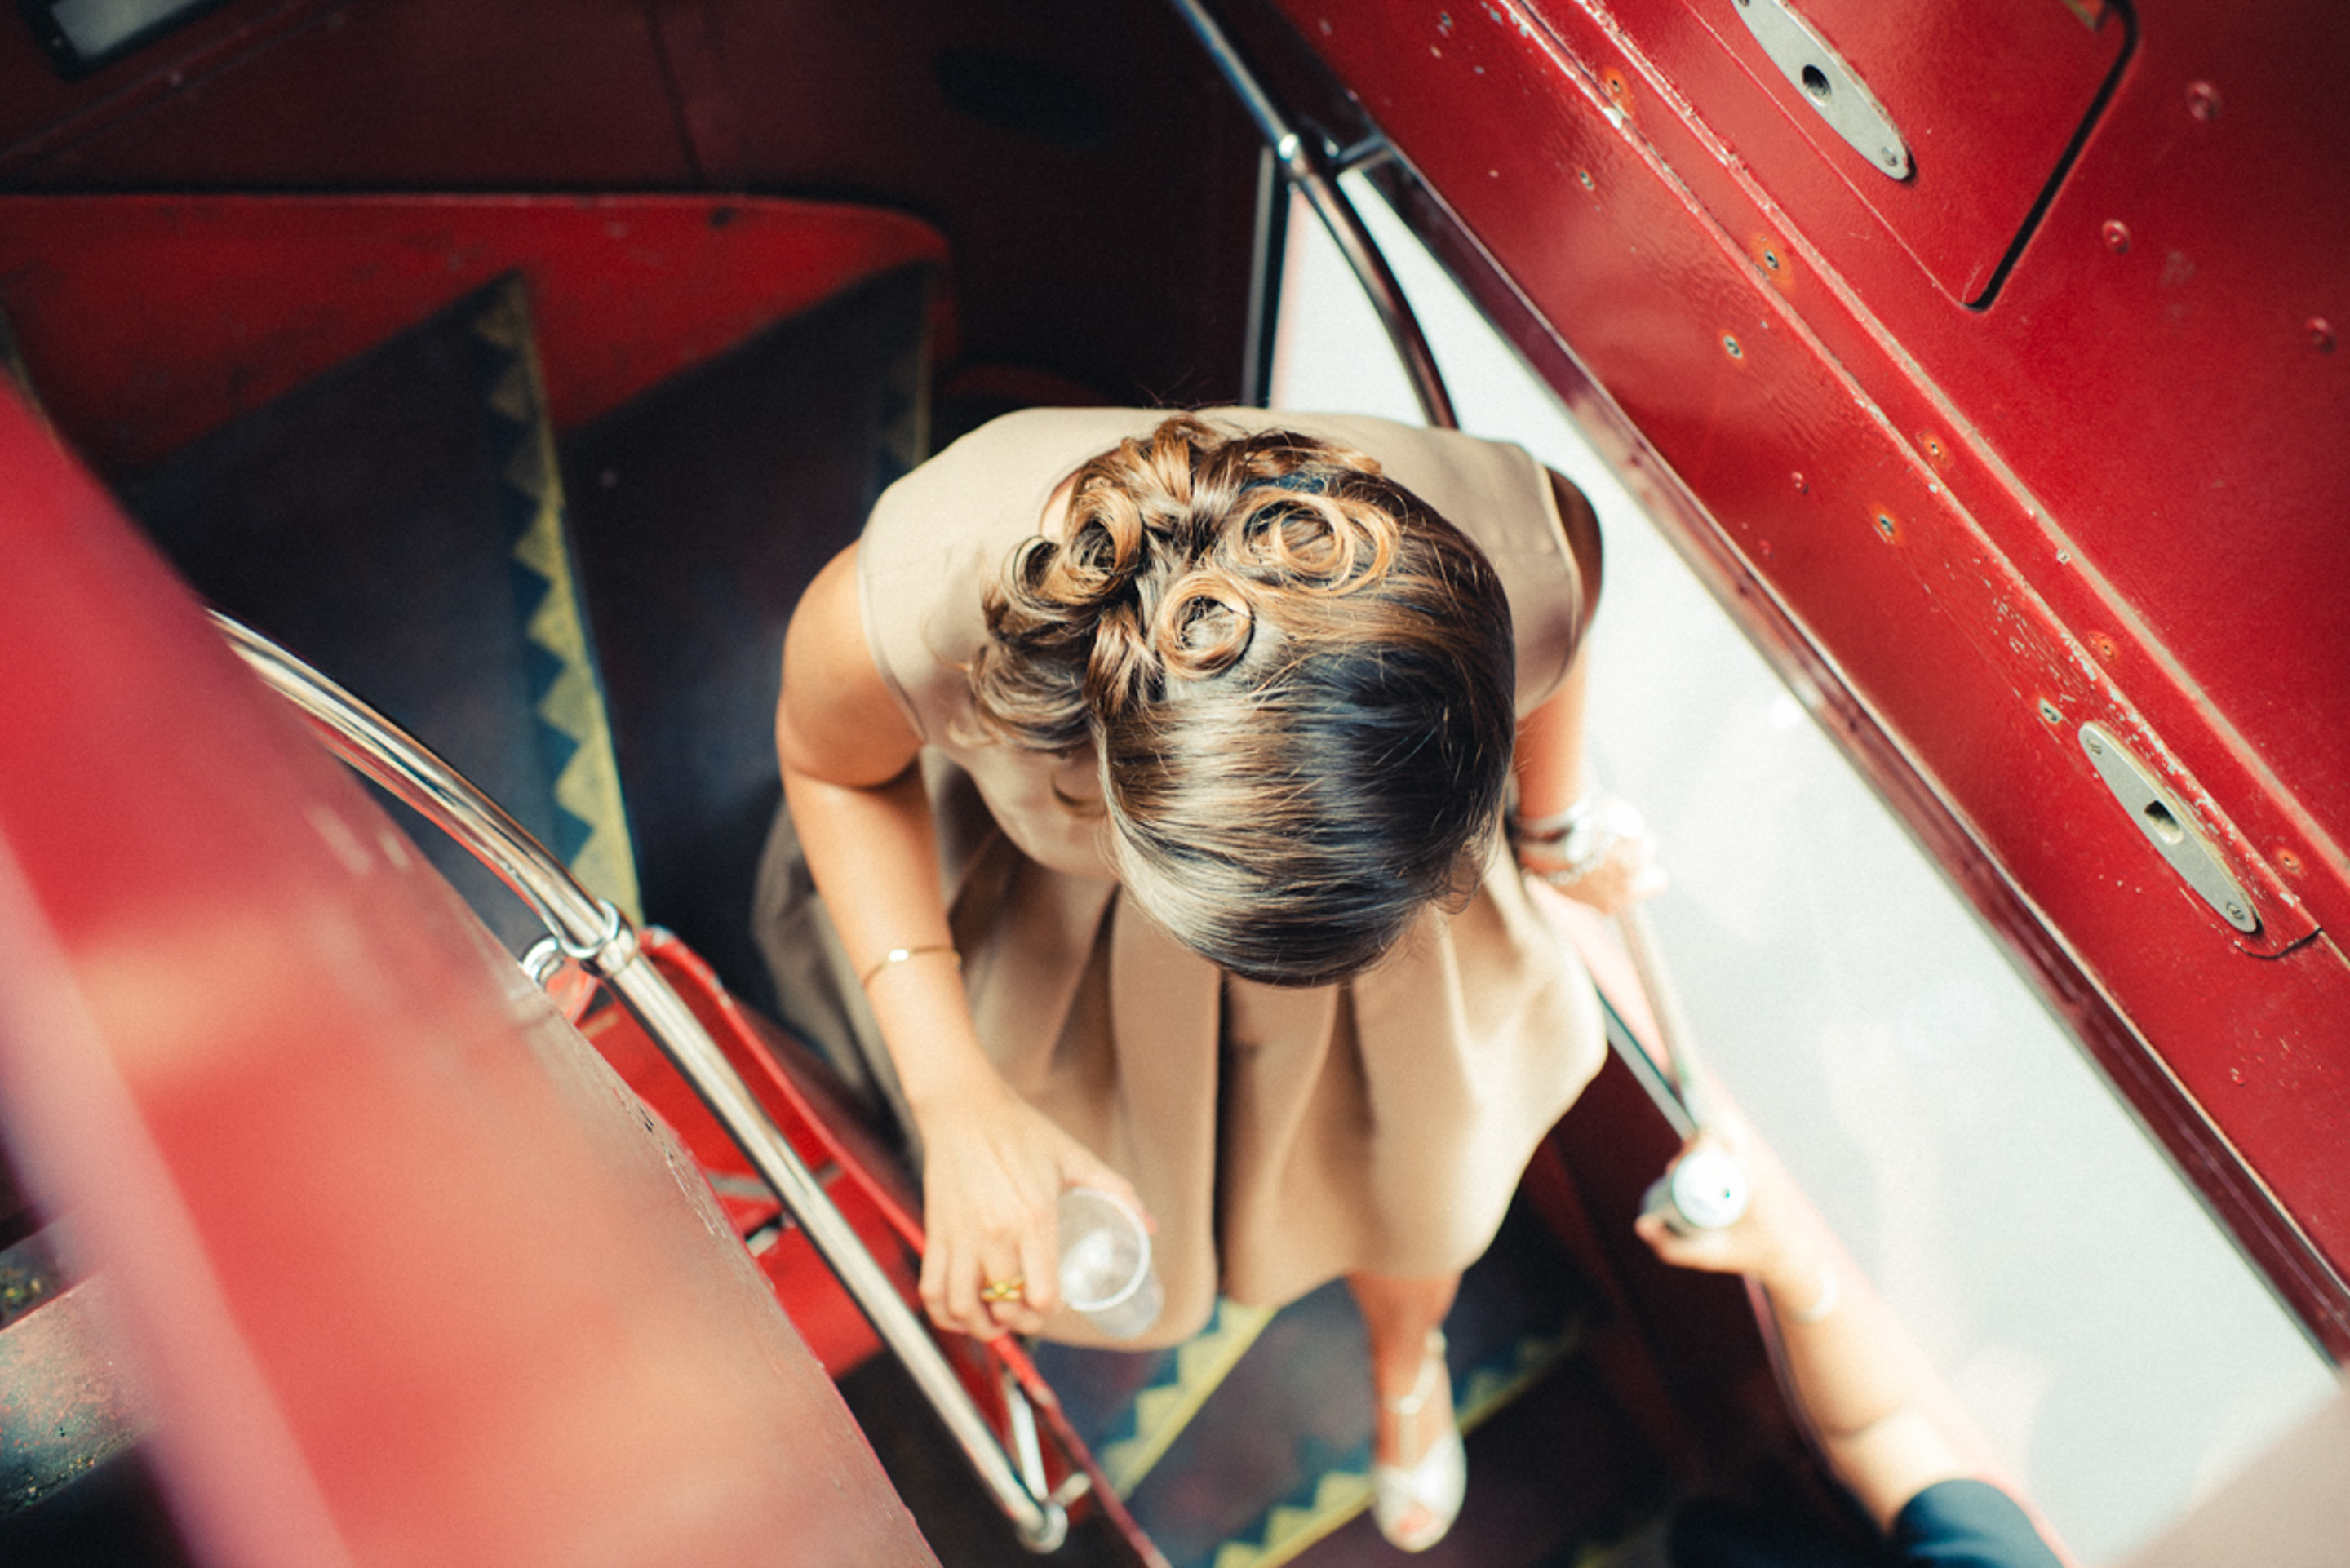 Elegant lady going down stairs of a double deck bus in a london wedding